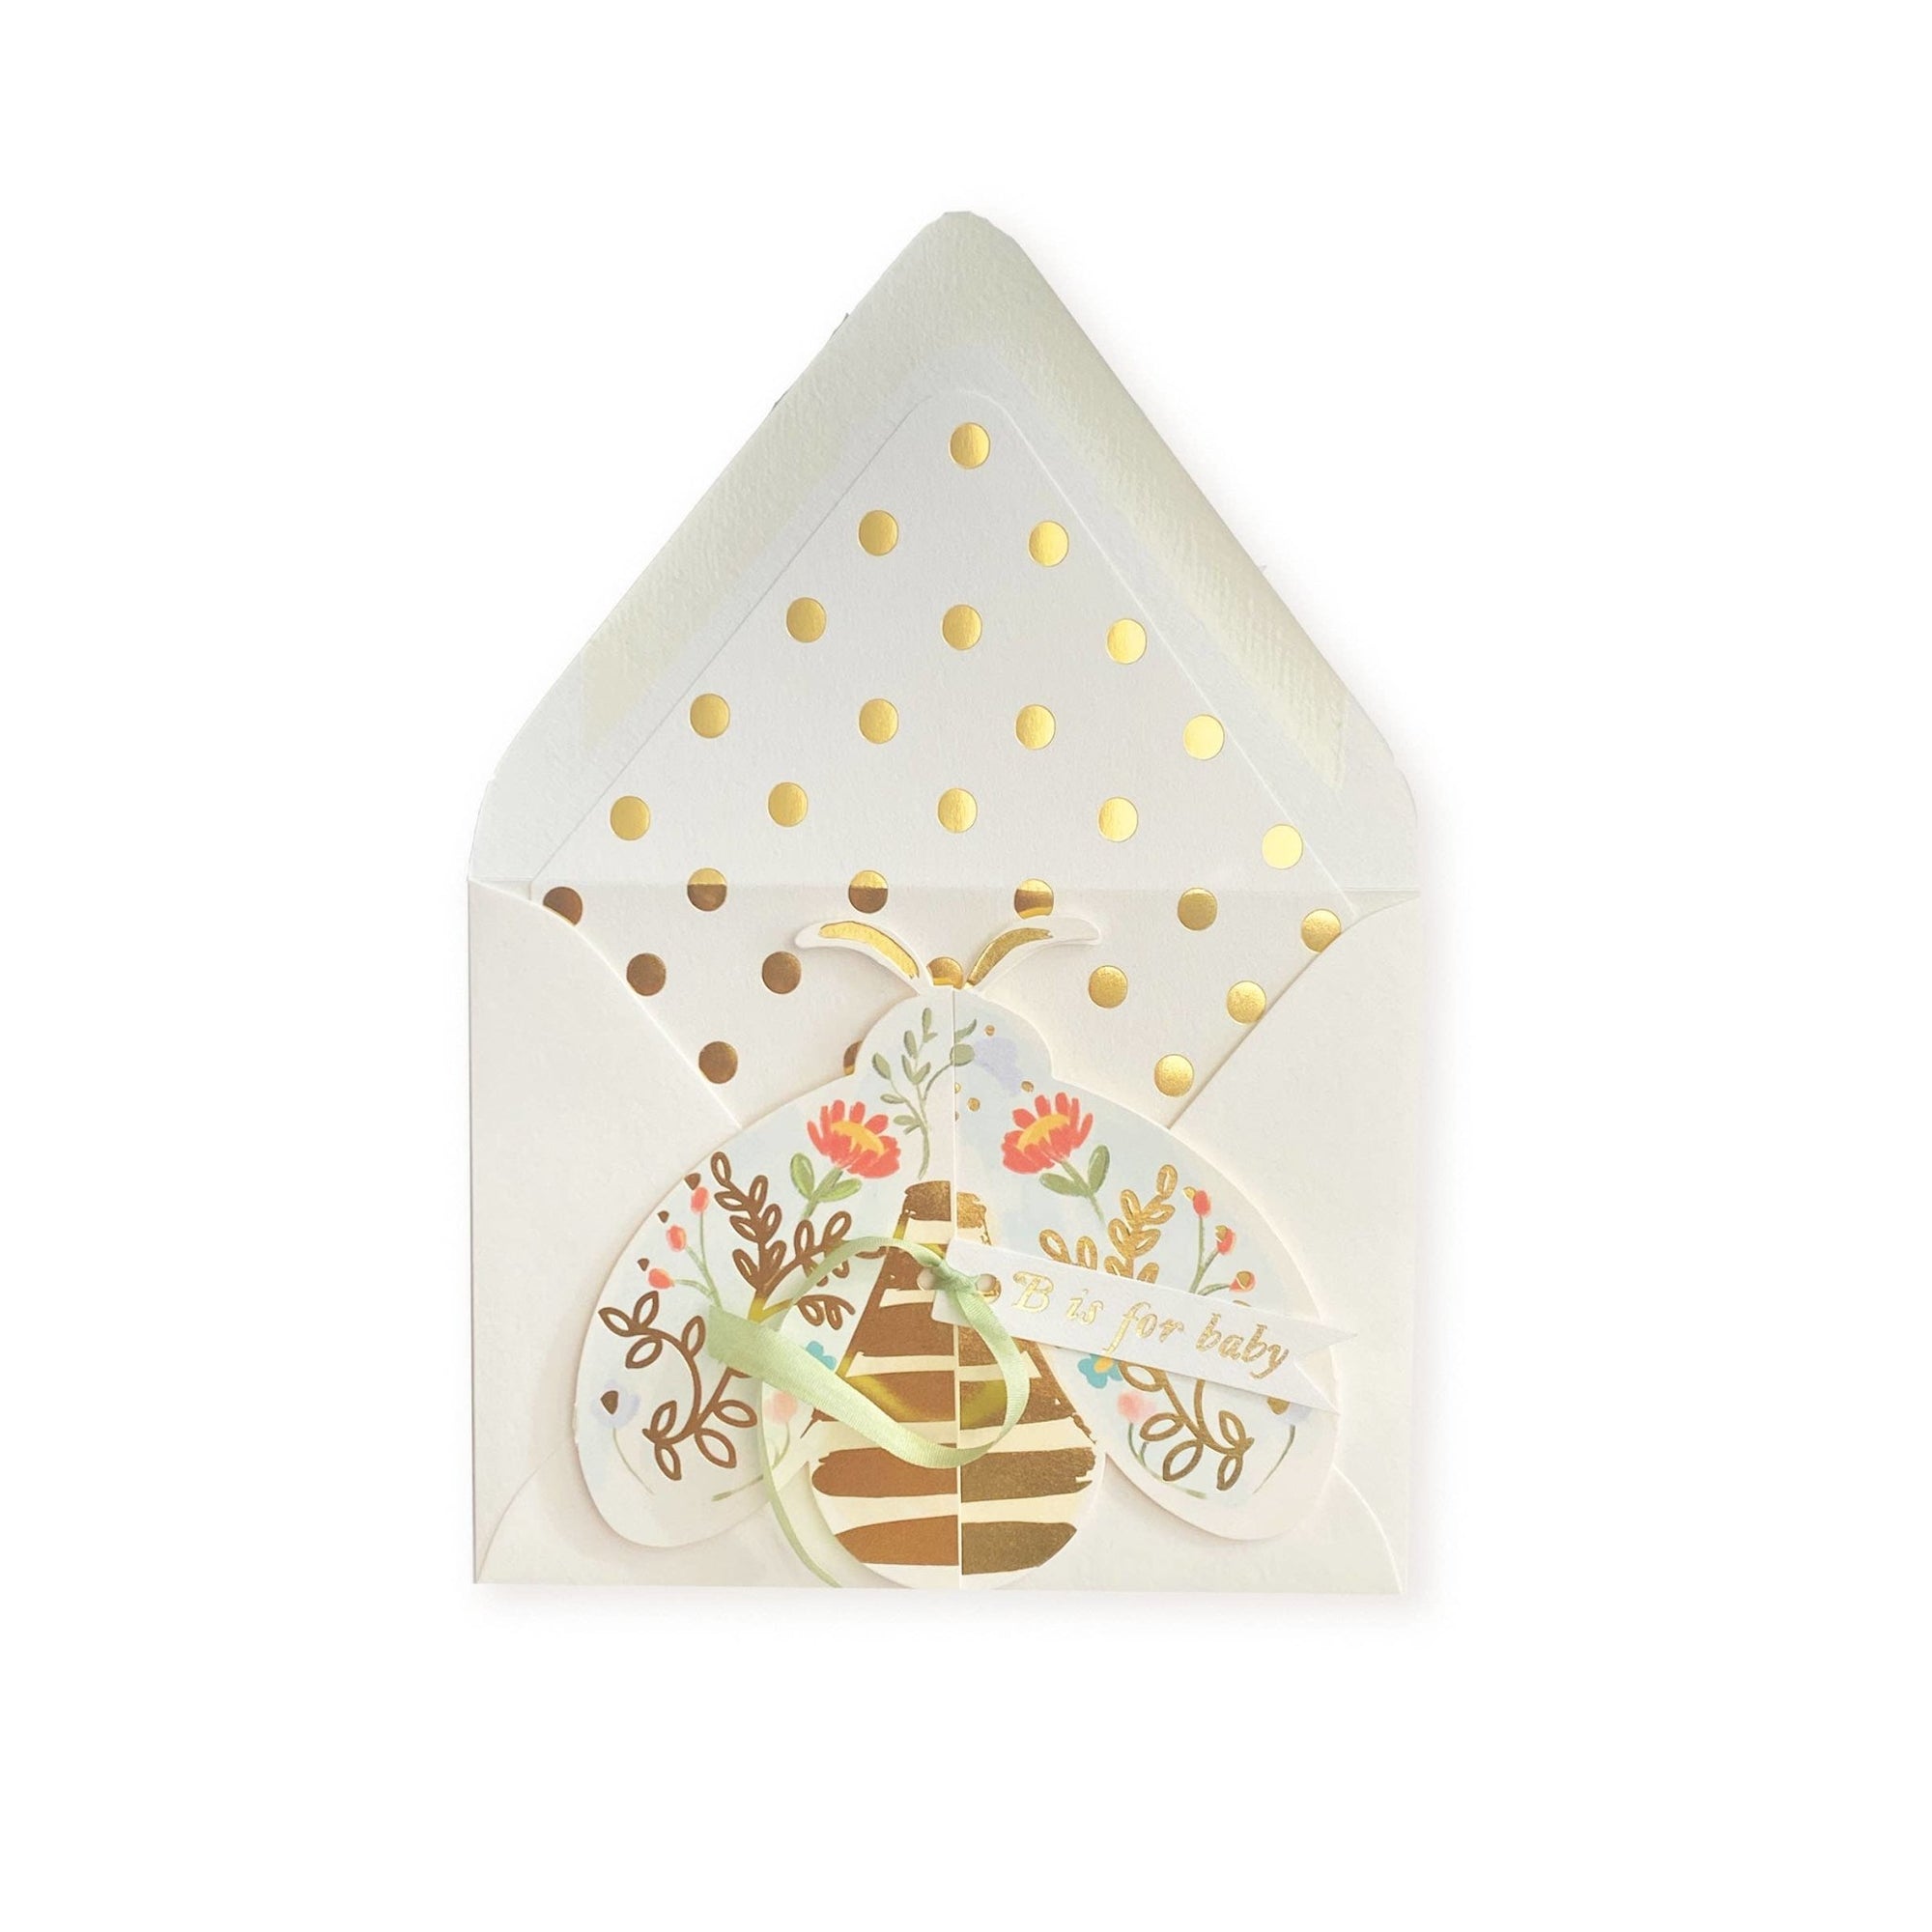 New Baby Card, B is for Baby Bee Die Cut Card